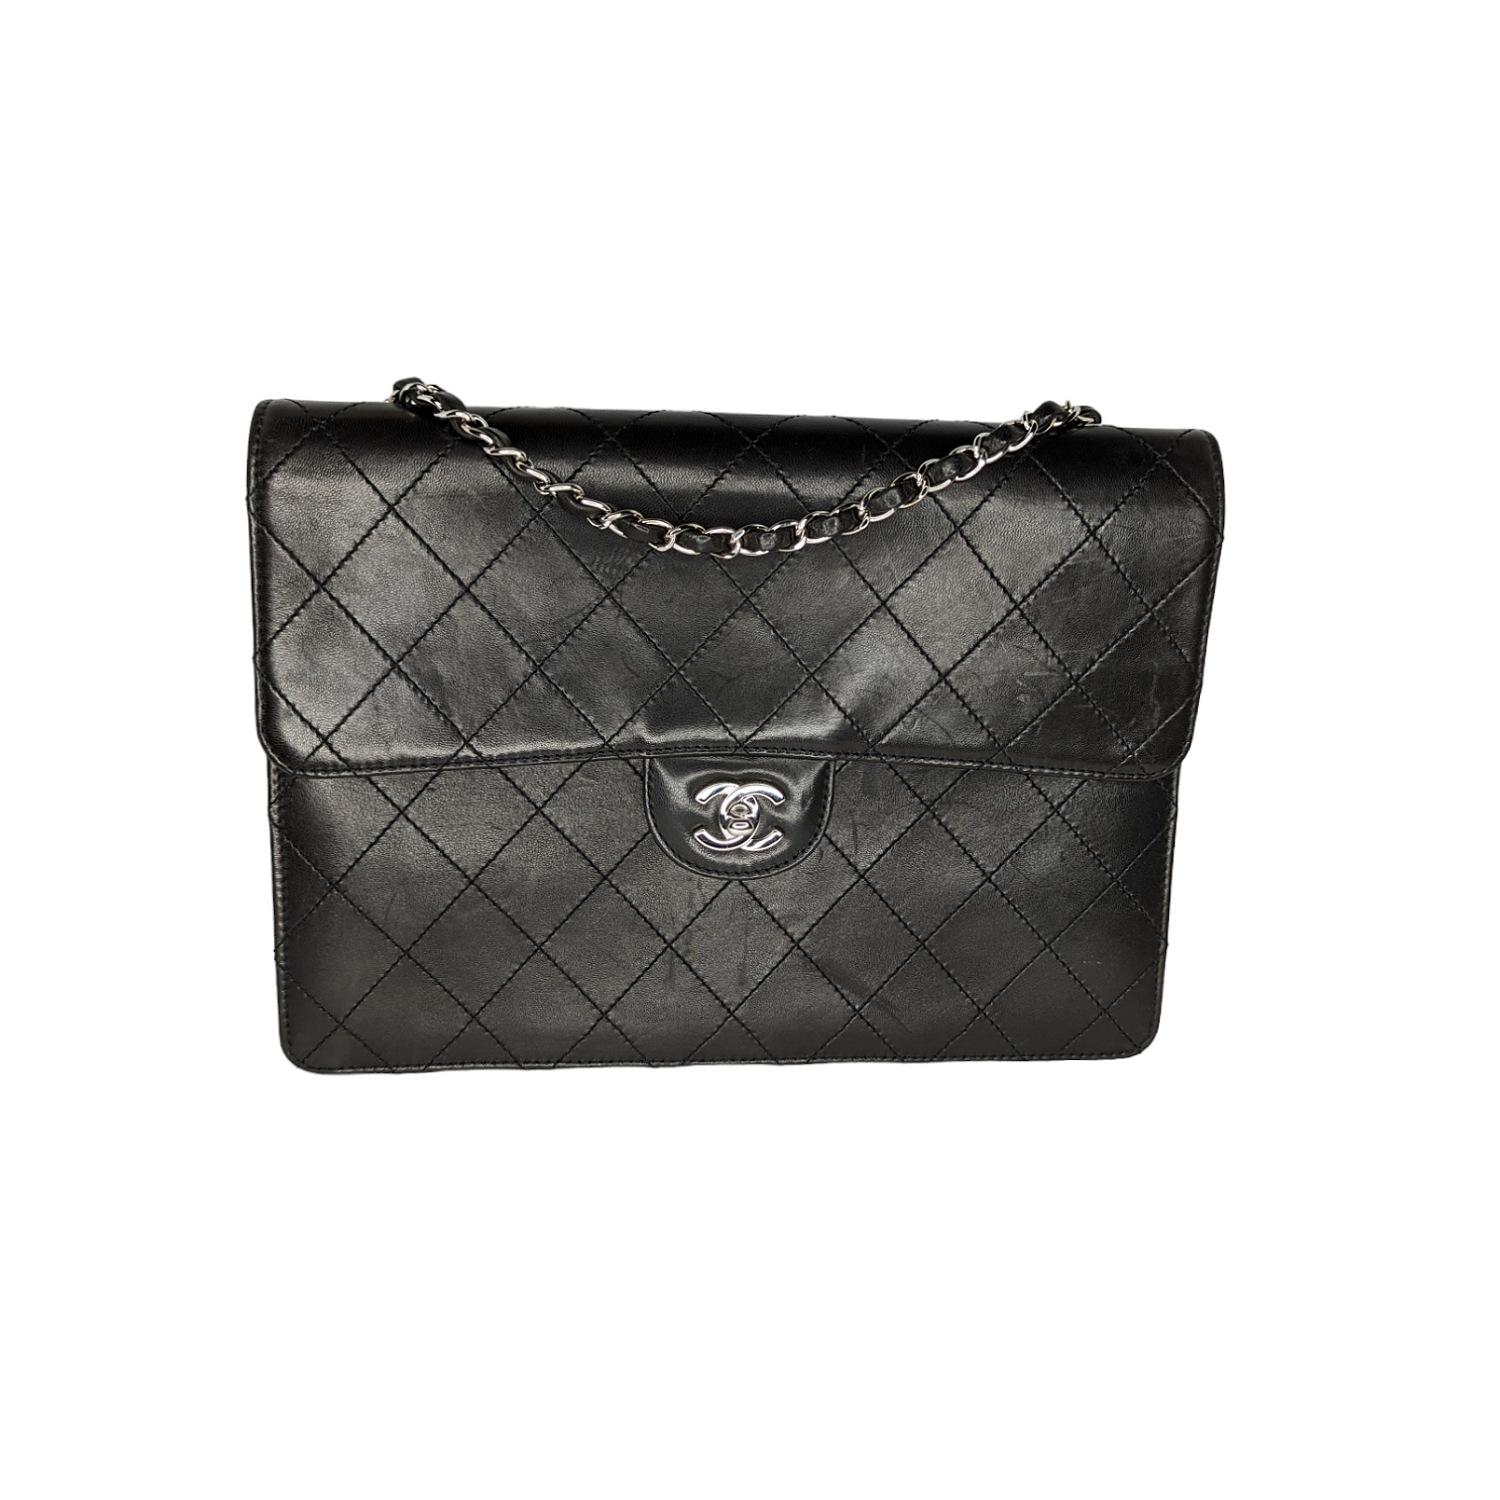 This classic bag is finely composed of luxurious diamond quilted lambskin leather. The bag features a silver chain link leather threaded shoulder strap and a silver Chanel CC turn lock. This opens the front flap to a leather interior with a zipper